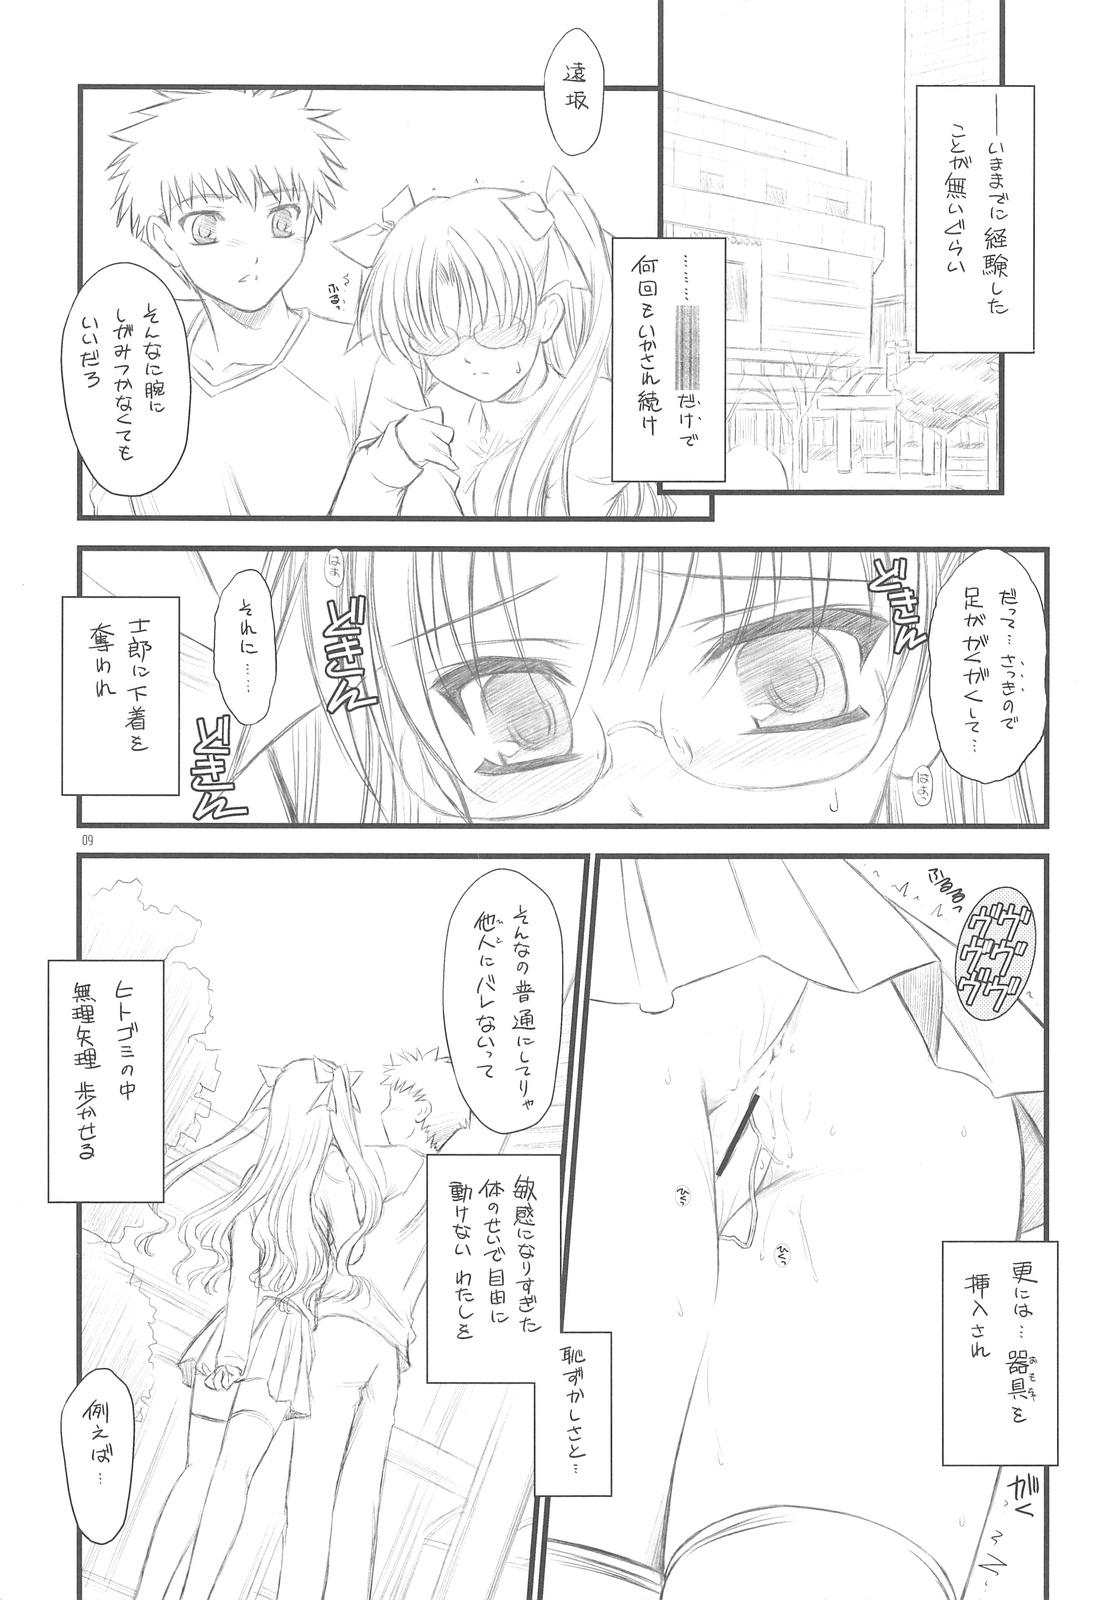 Selfie PP2+ - Fate stay night Made - Page 8